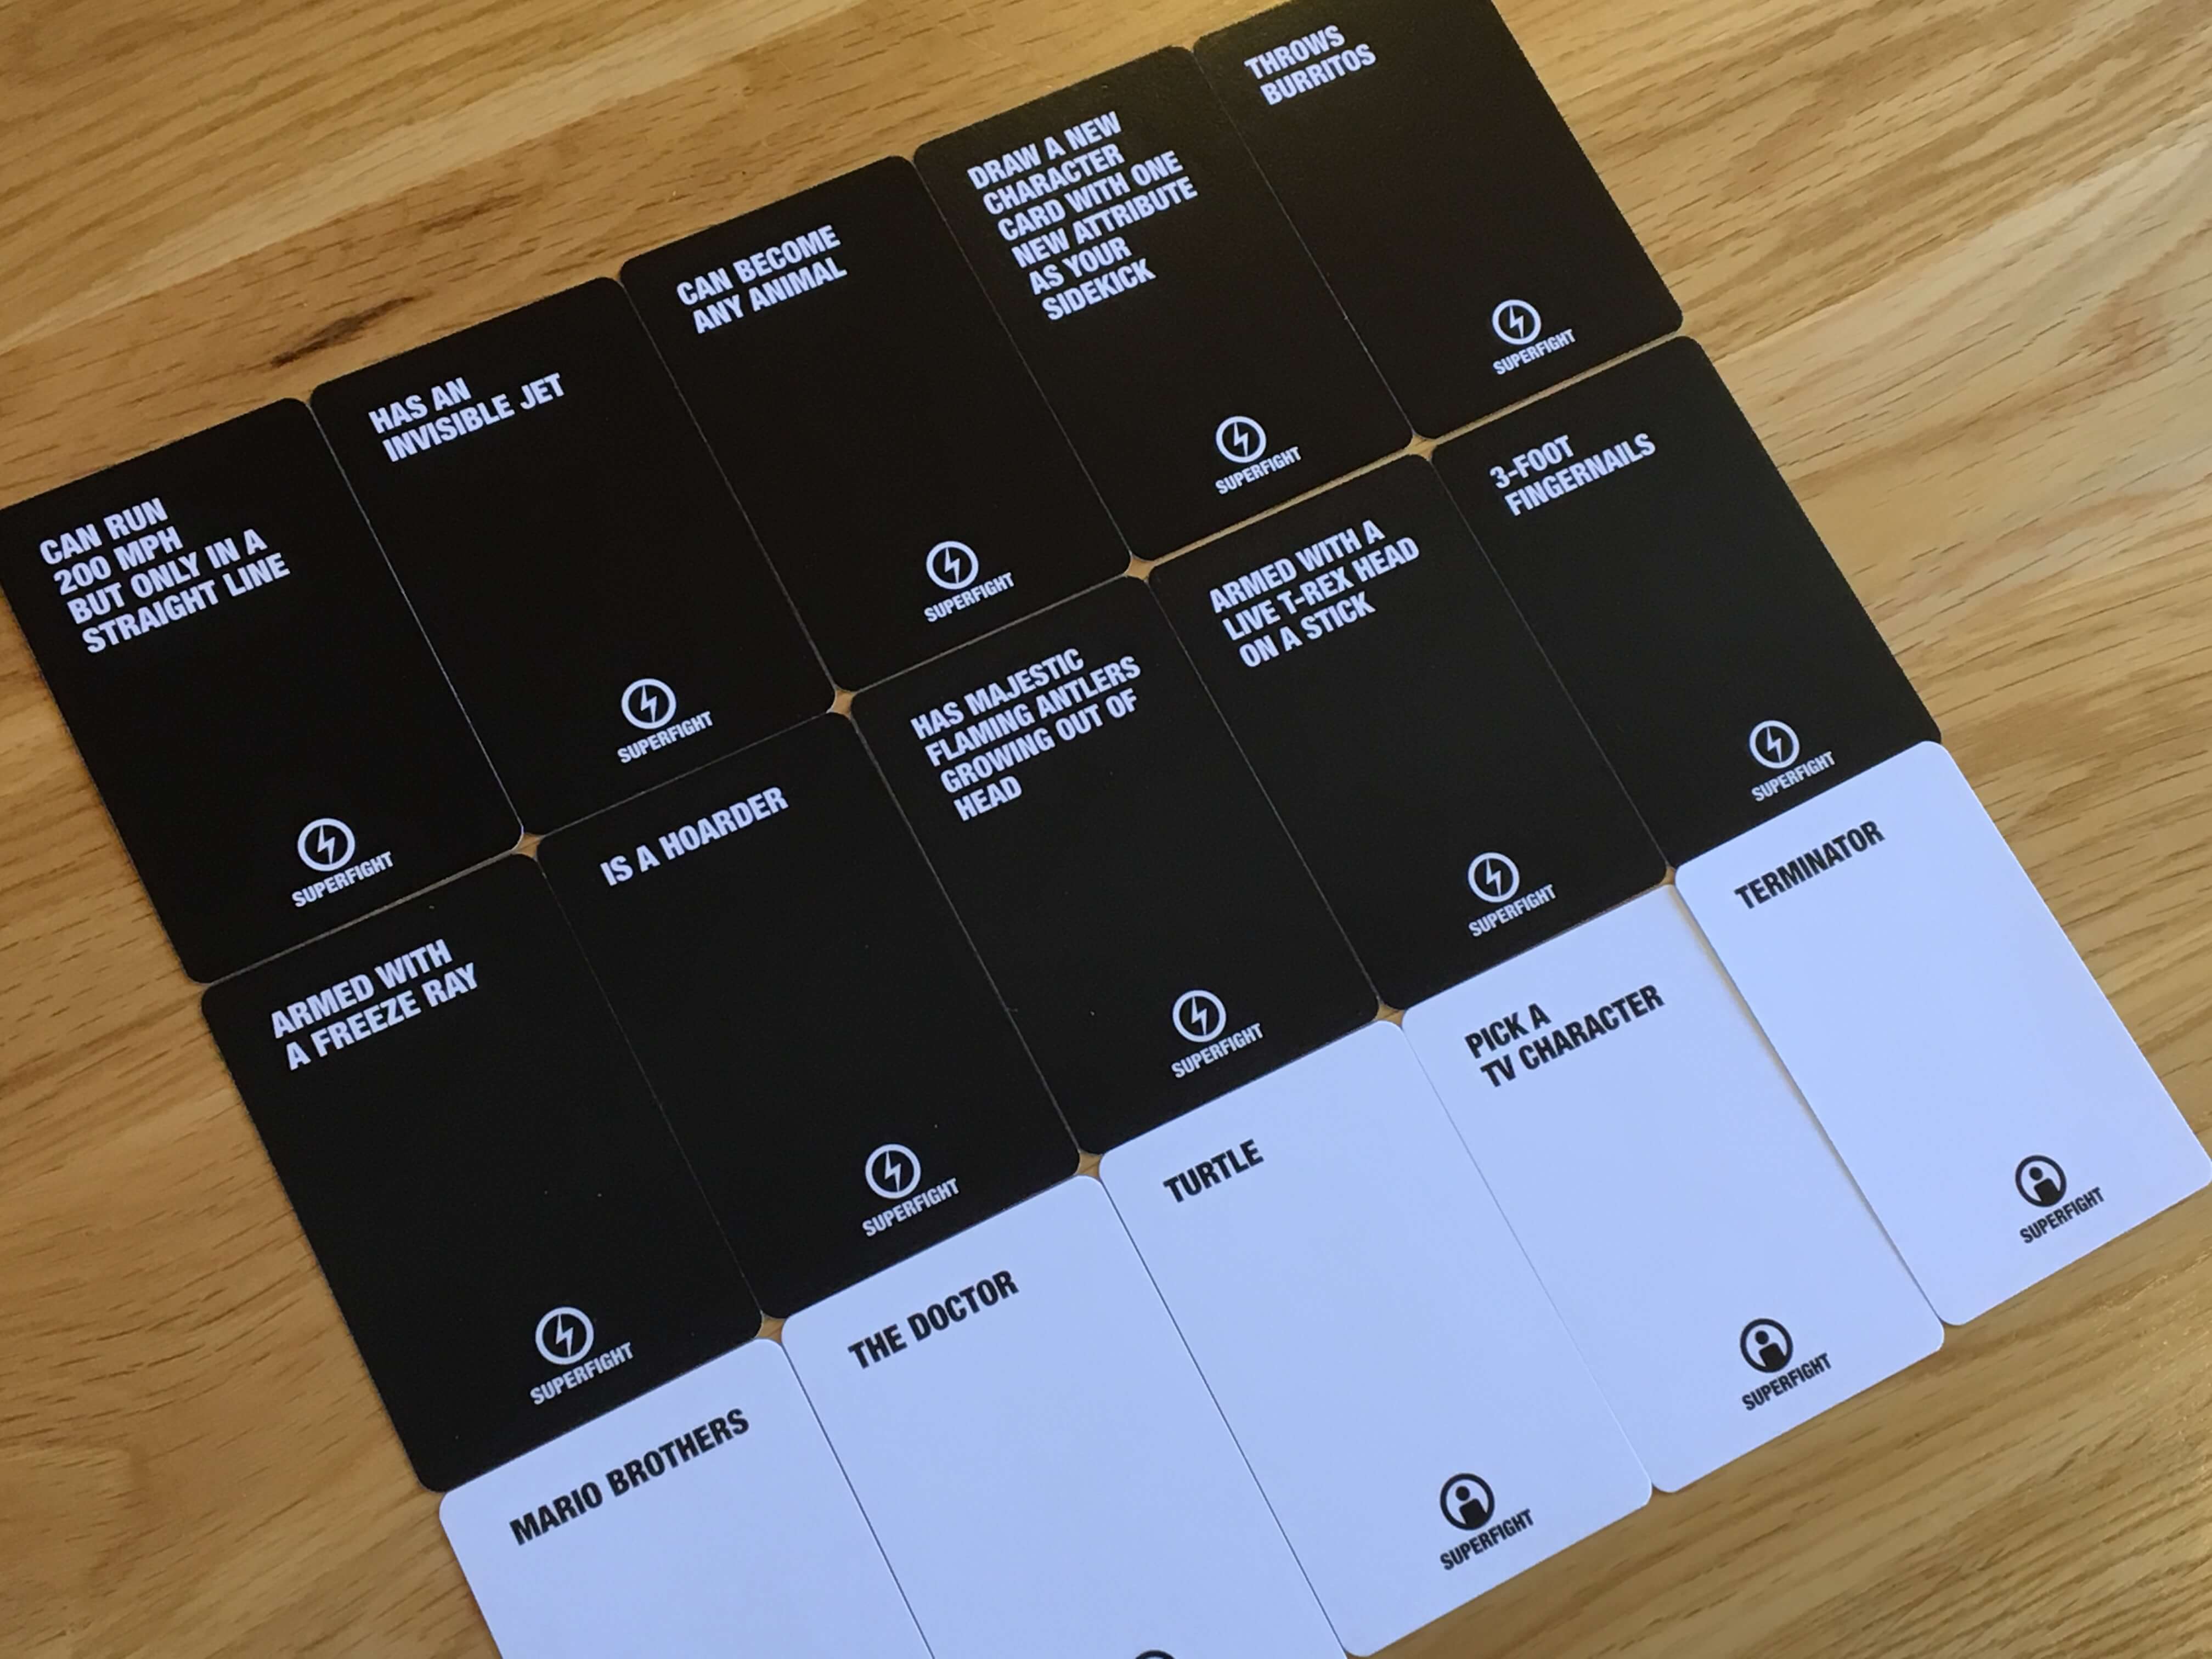 Superfight review — N64 or PlayStation? – Big Boss Battle (B3)